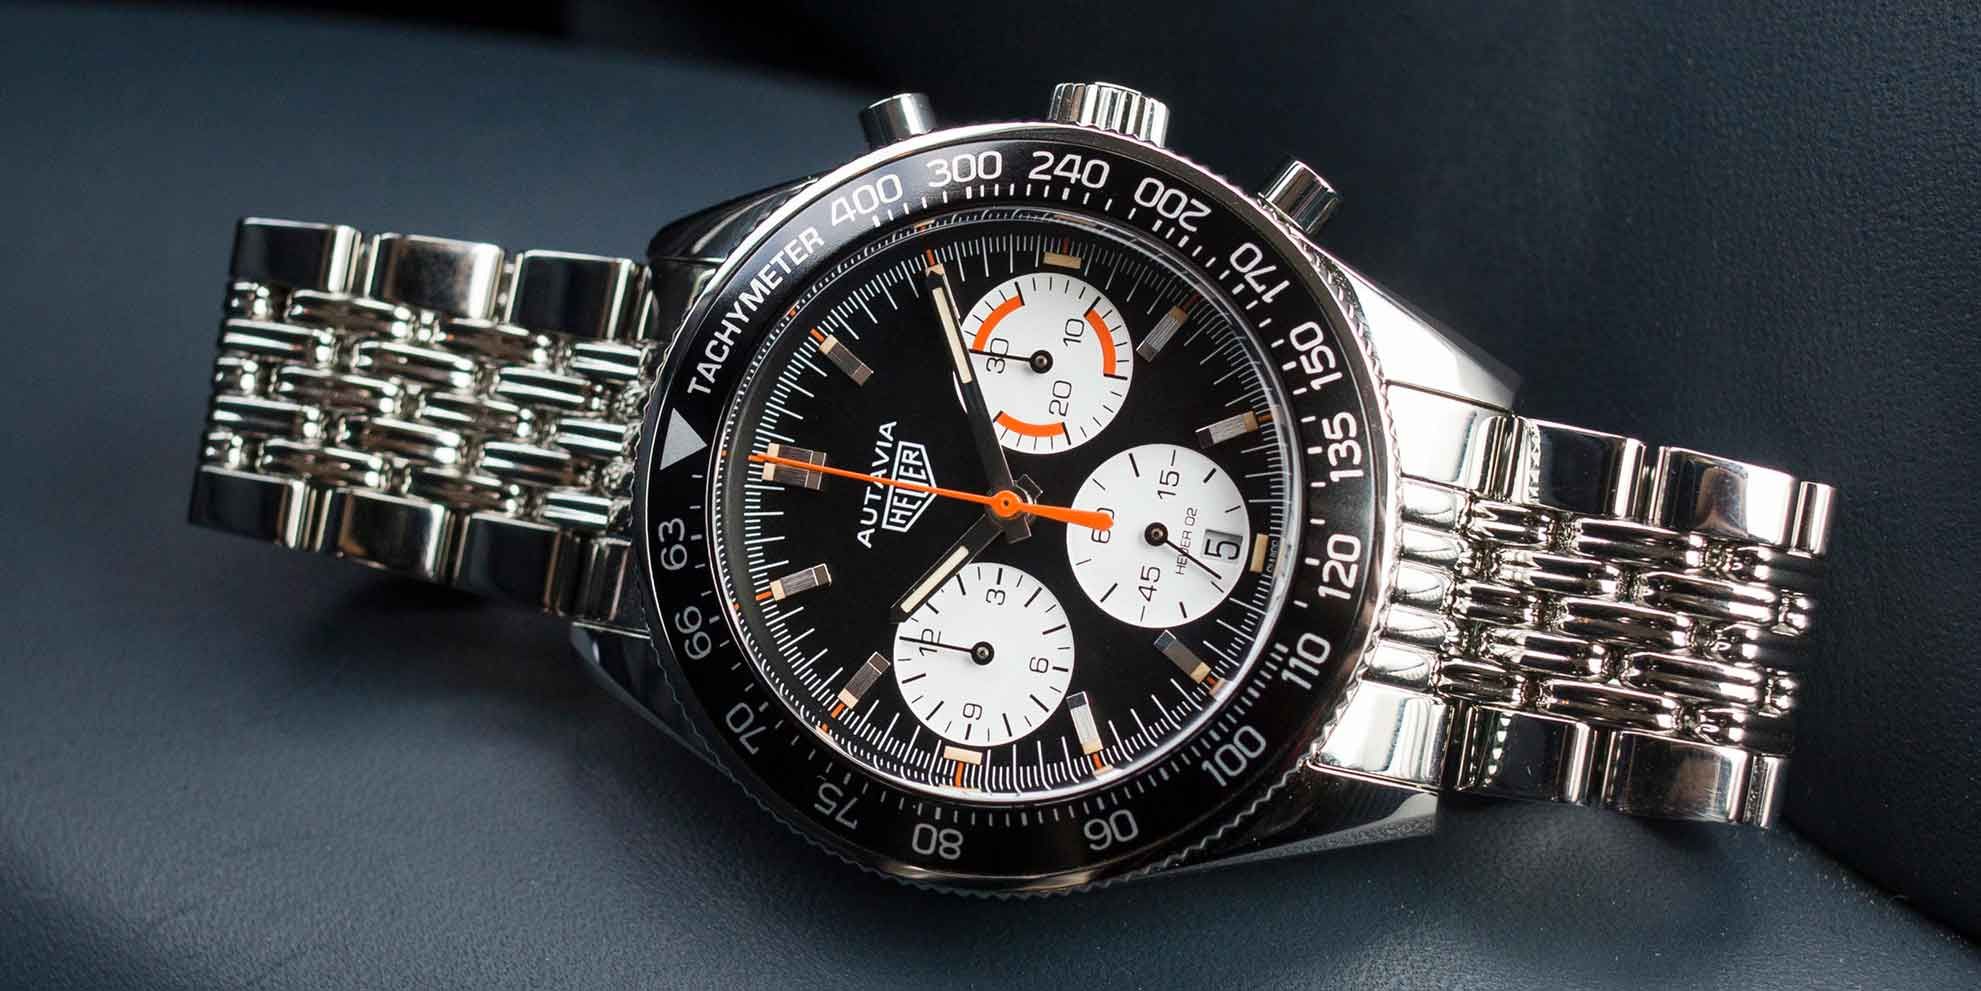 This TAG Heuer x Hodinkee Watch Is an Homage to a Super-Rare Classic